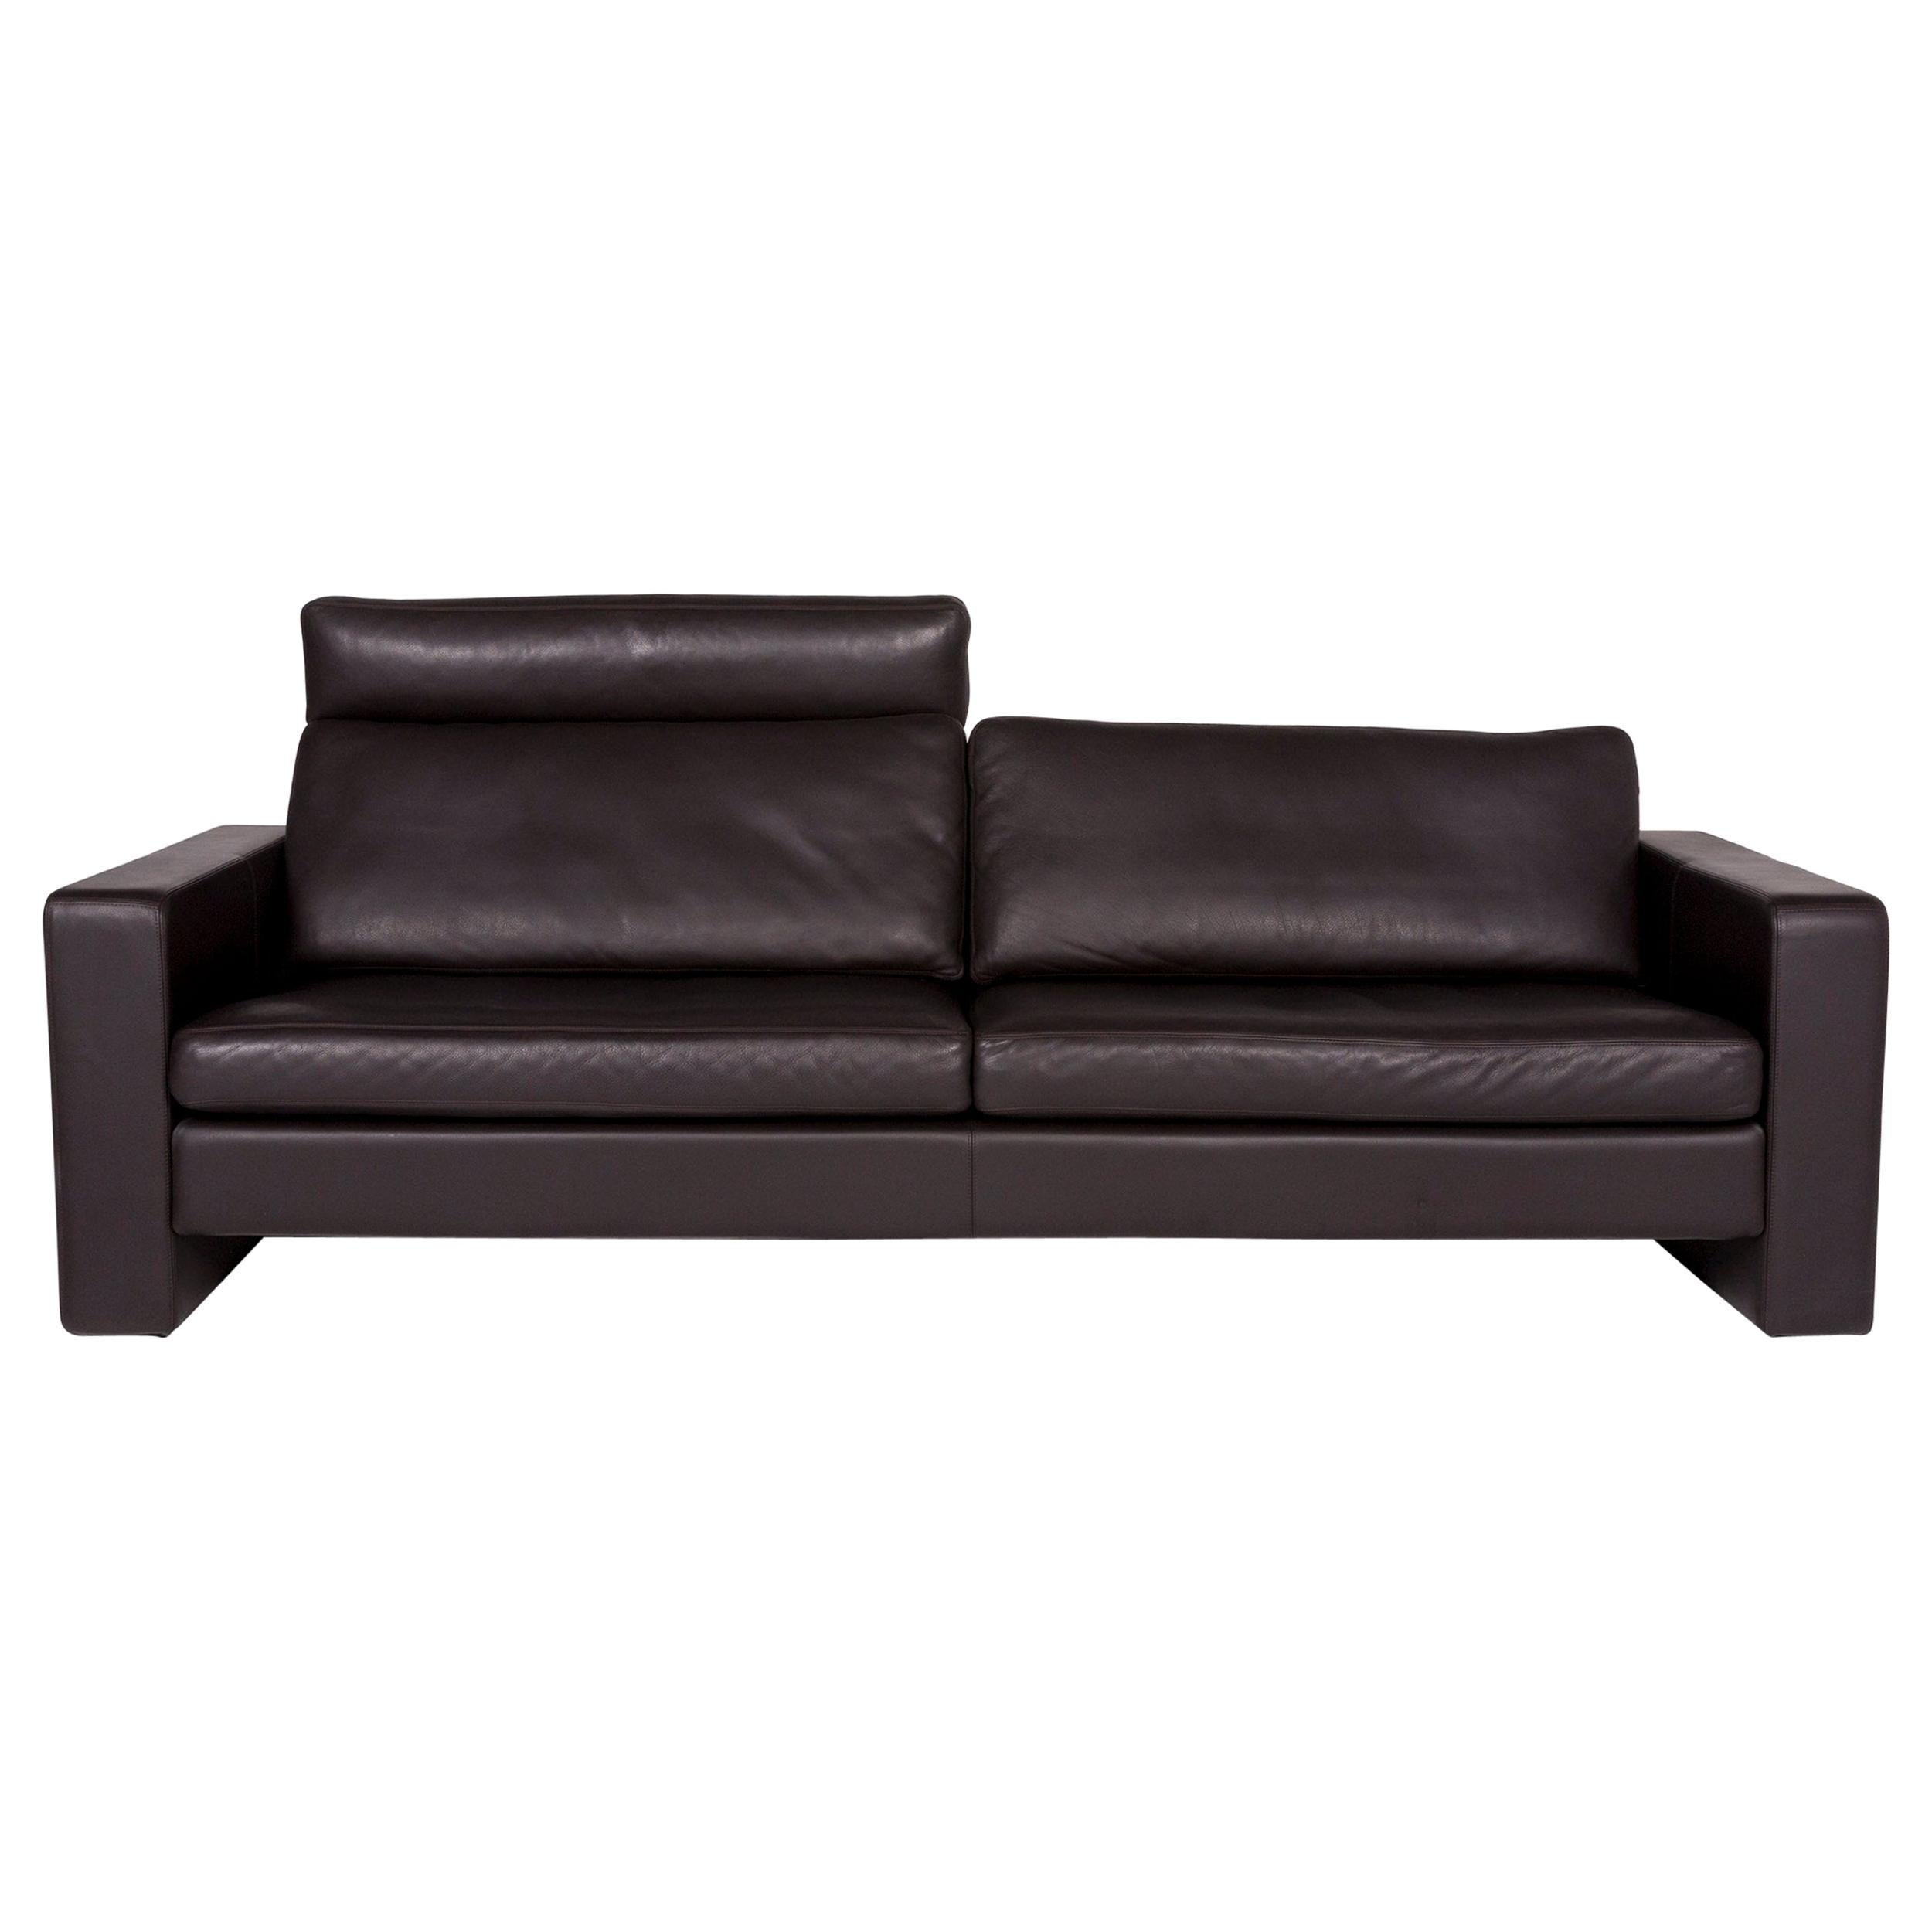 COR Conseta Leather Sofa Brown Dark Brown Three-Seat Couch For Sale